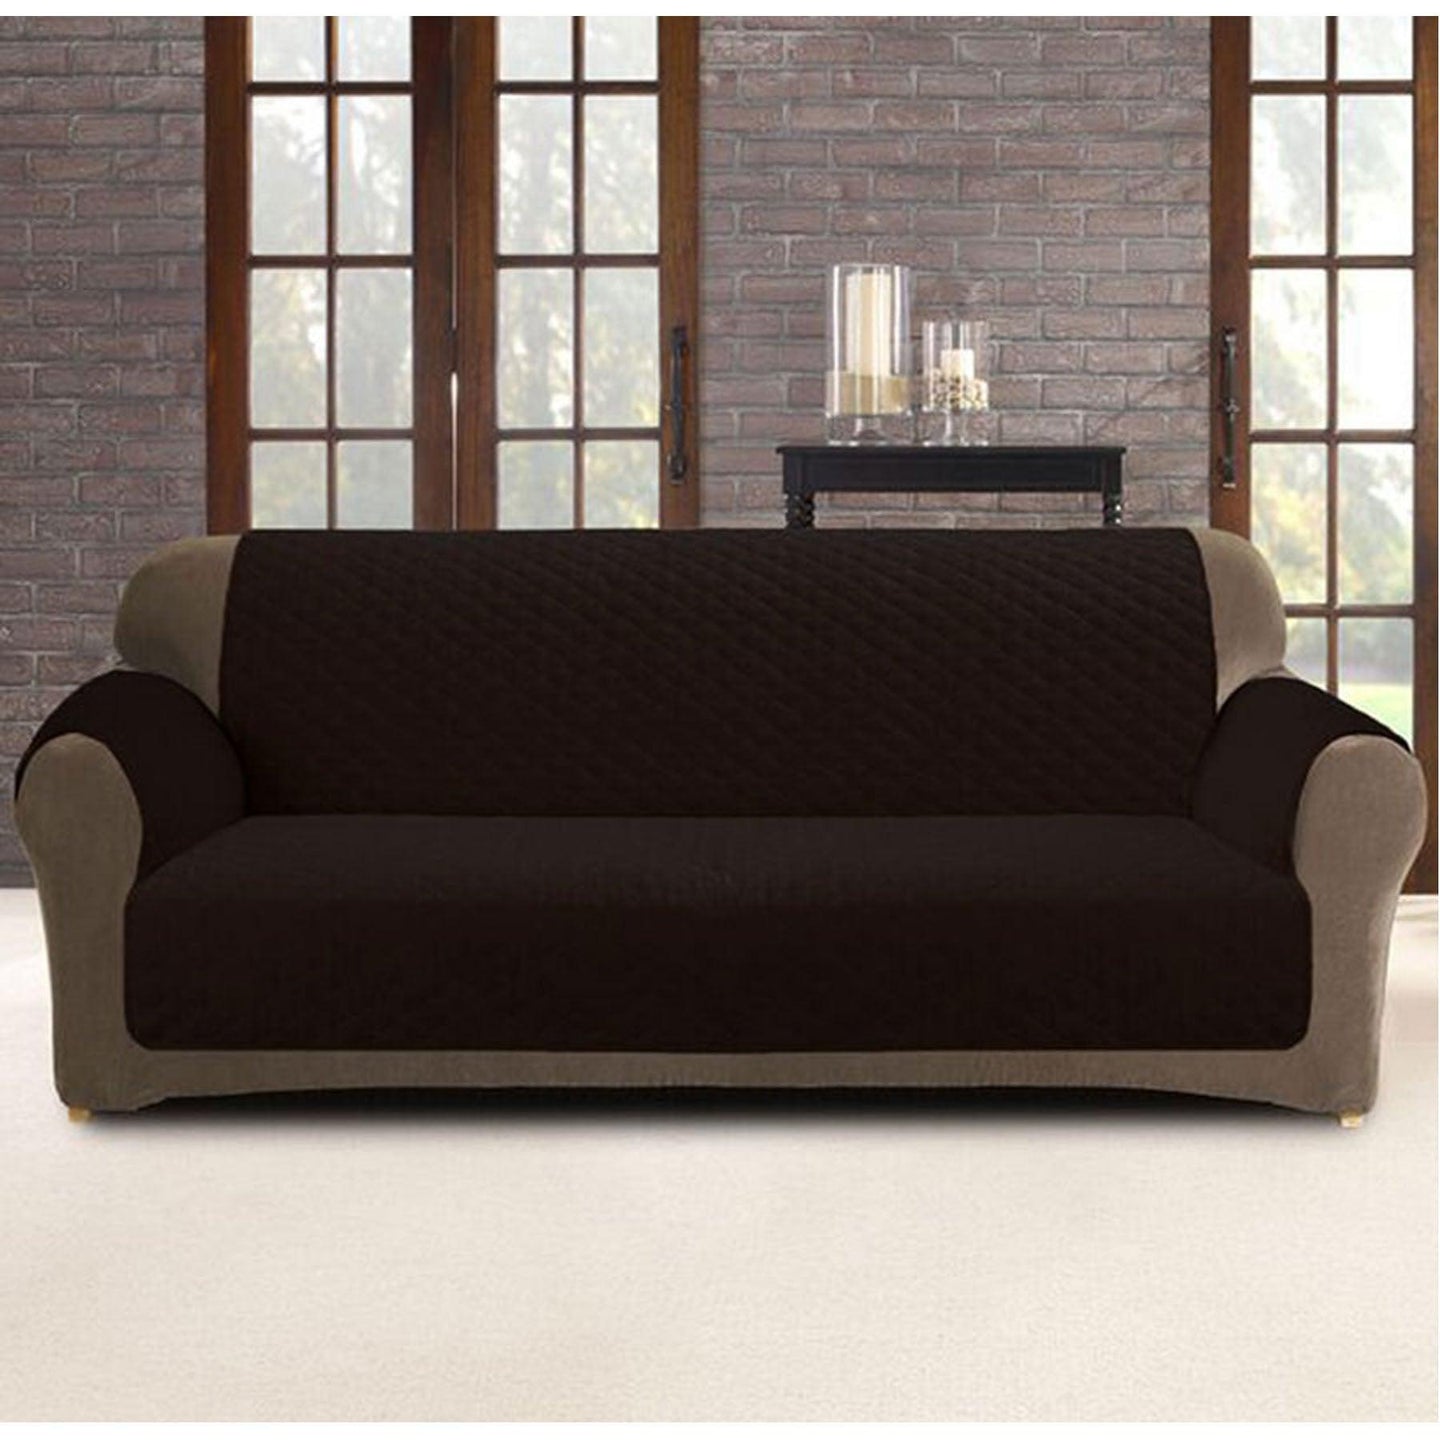 Custom Fit Sofa Cover Protector Two Seater Coffee (Chocolate) Products On Sale Australia | Home & Garden > Decor Category